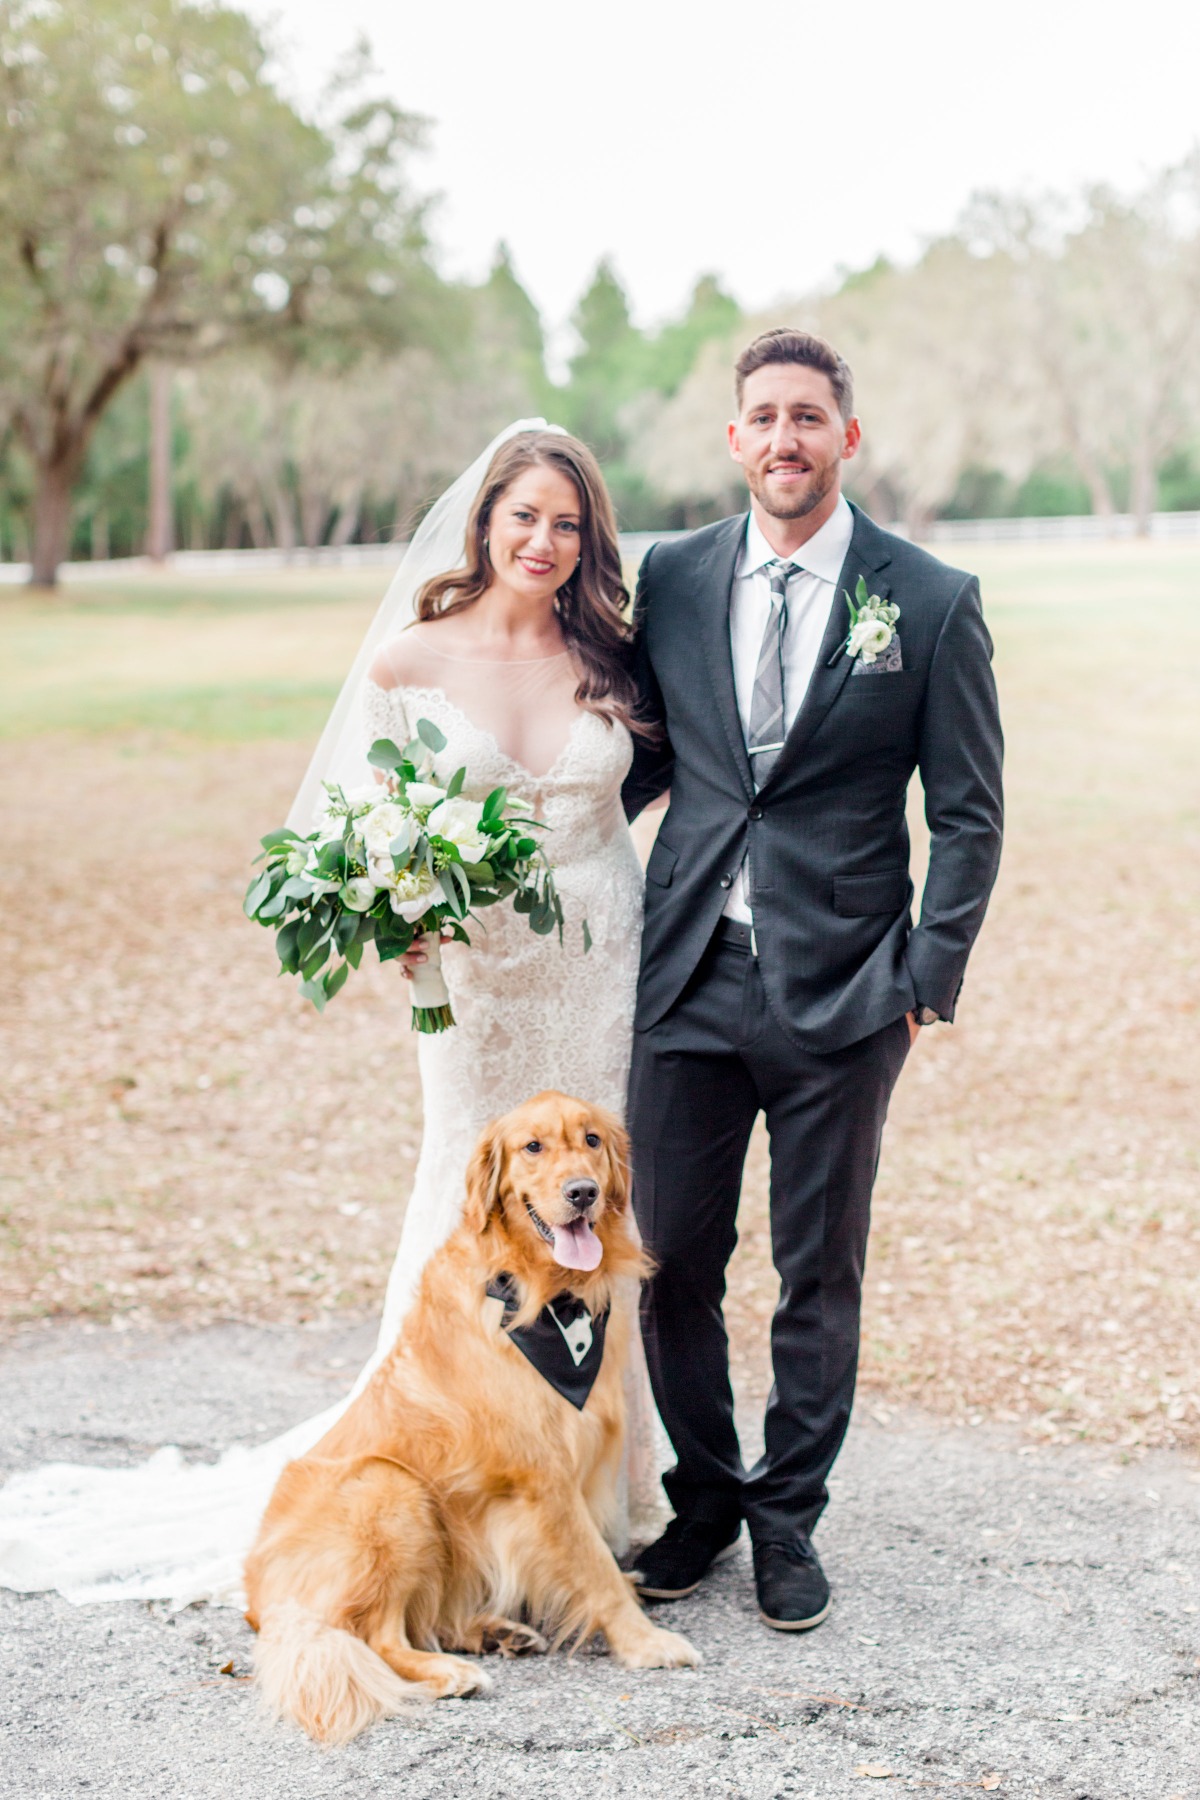 5 Tips for Your Dog of Honor on Wedding Day From FairyTail Pet Care